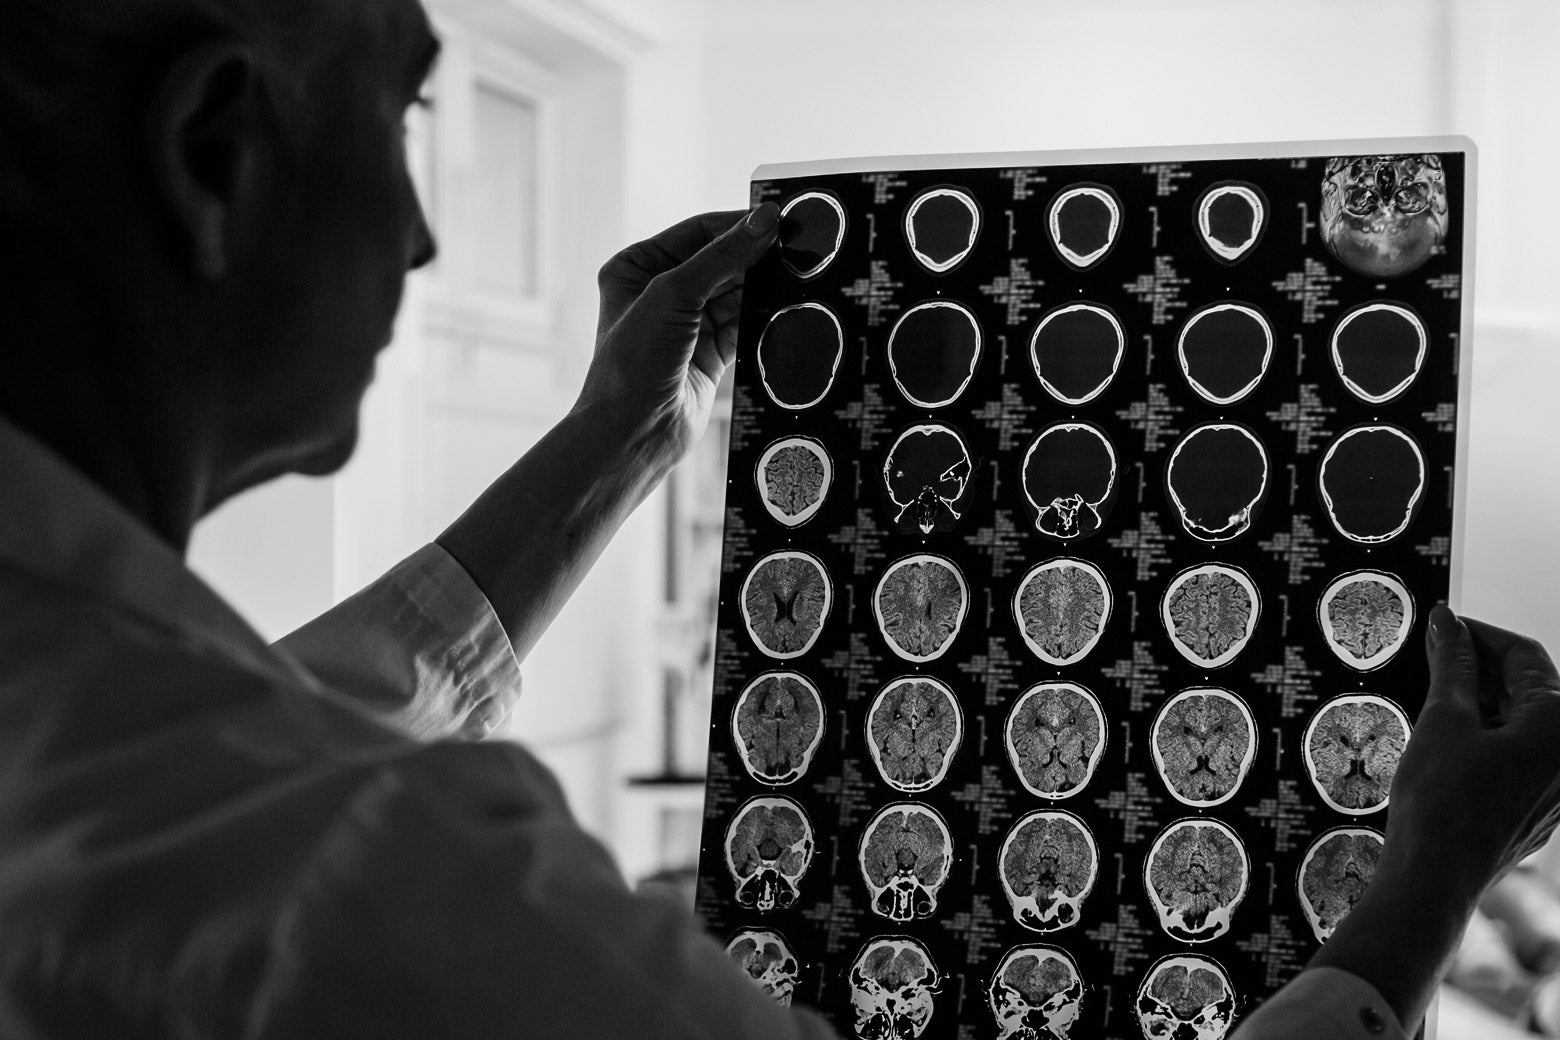 A doctor looks at brain scans.